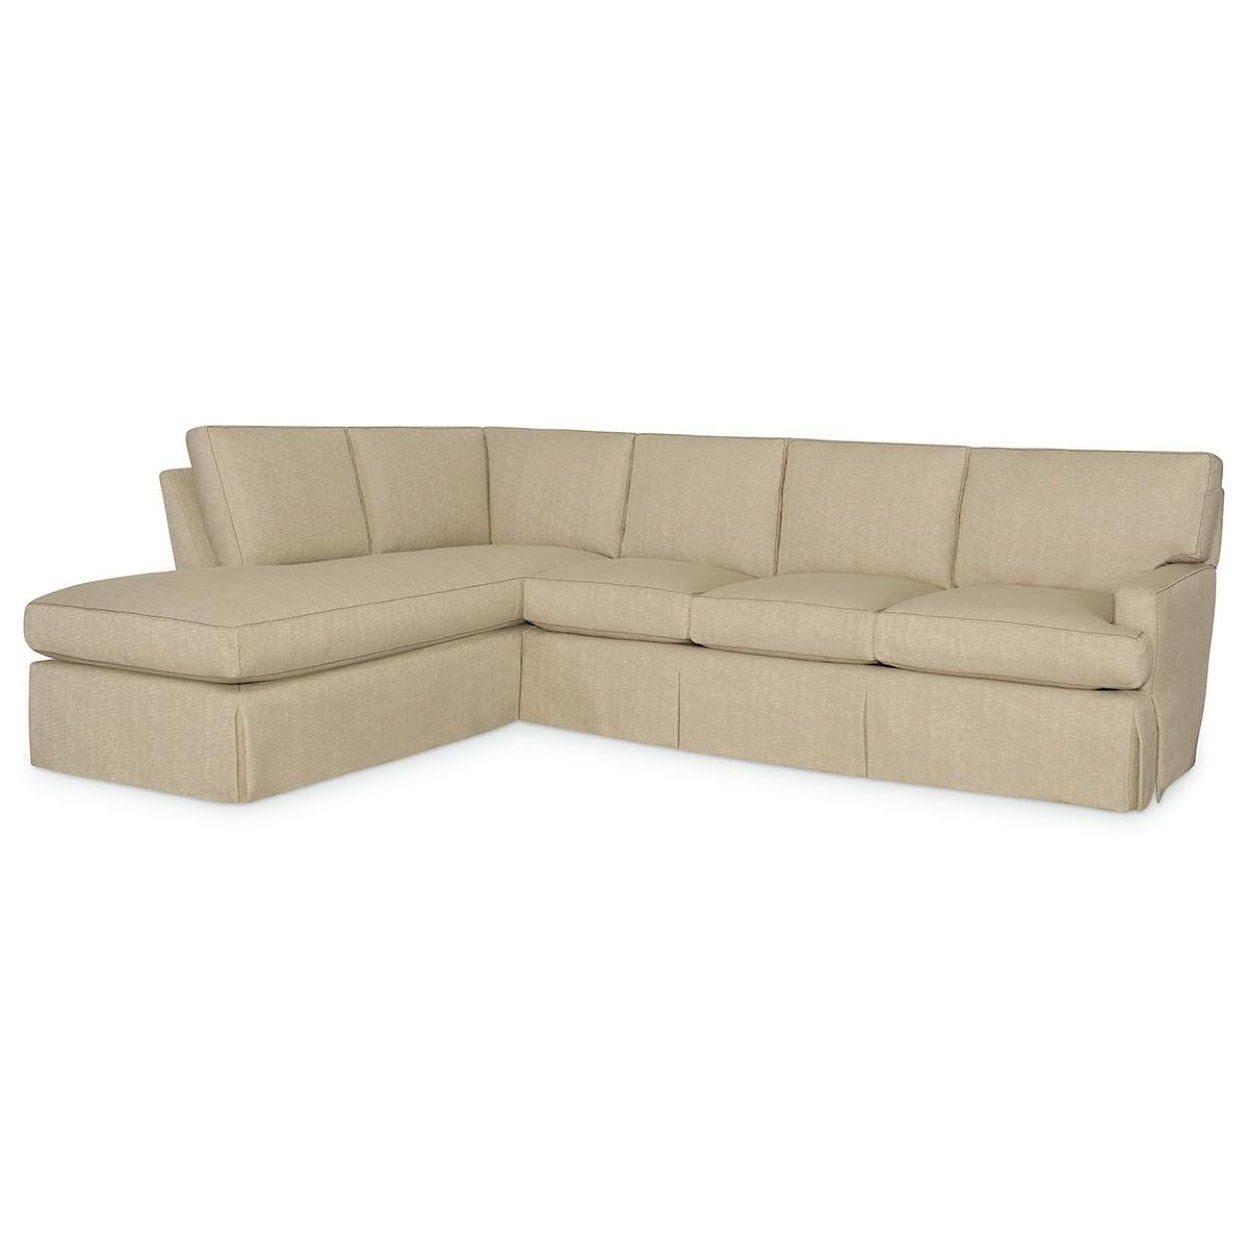 C.R. Laine Custom Design 8800 Series L Shaped Sofa with Chaise